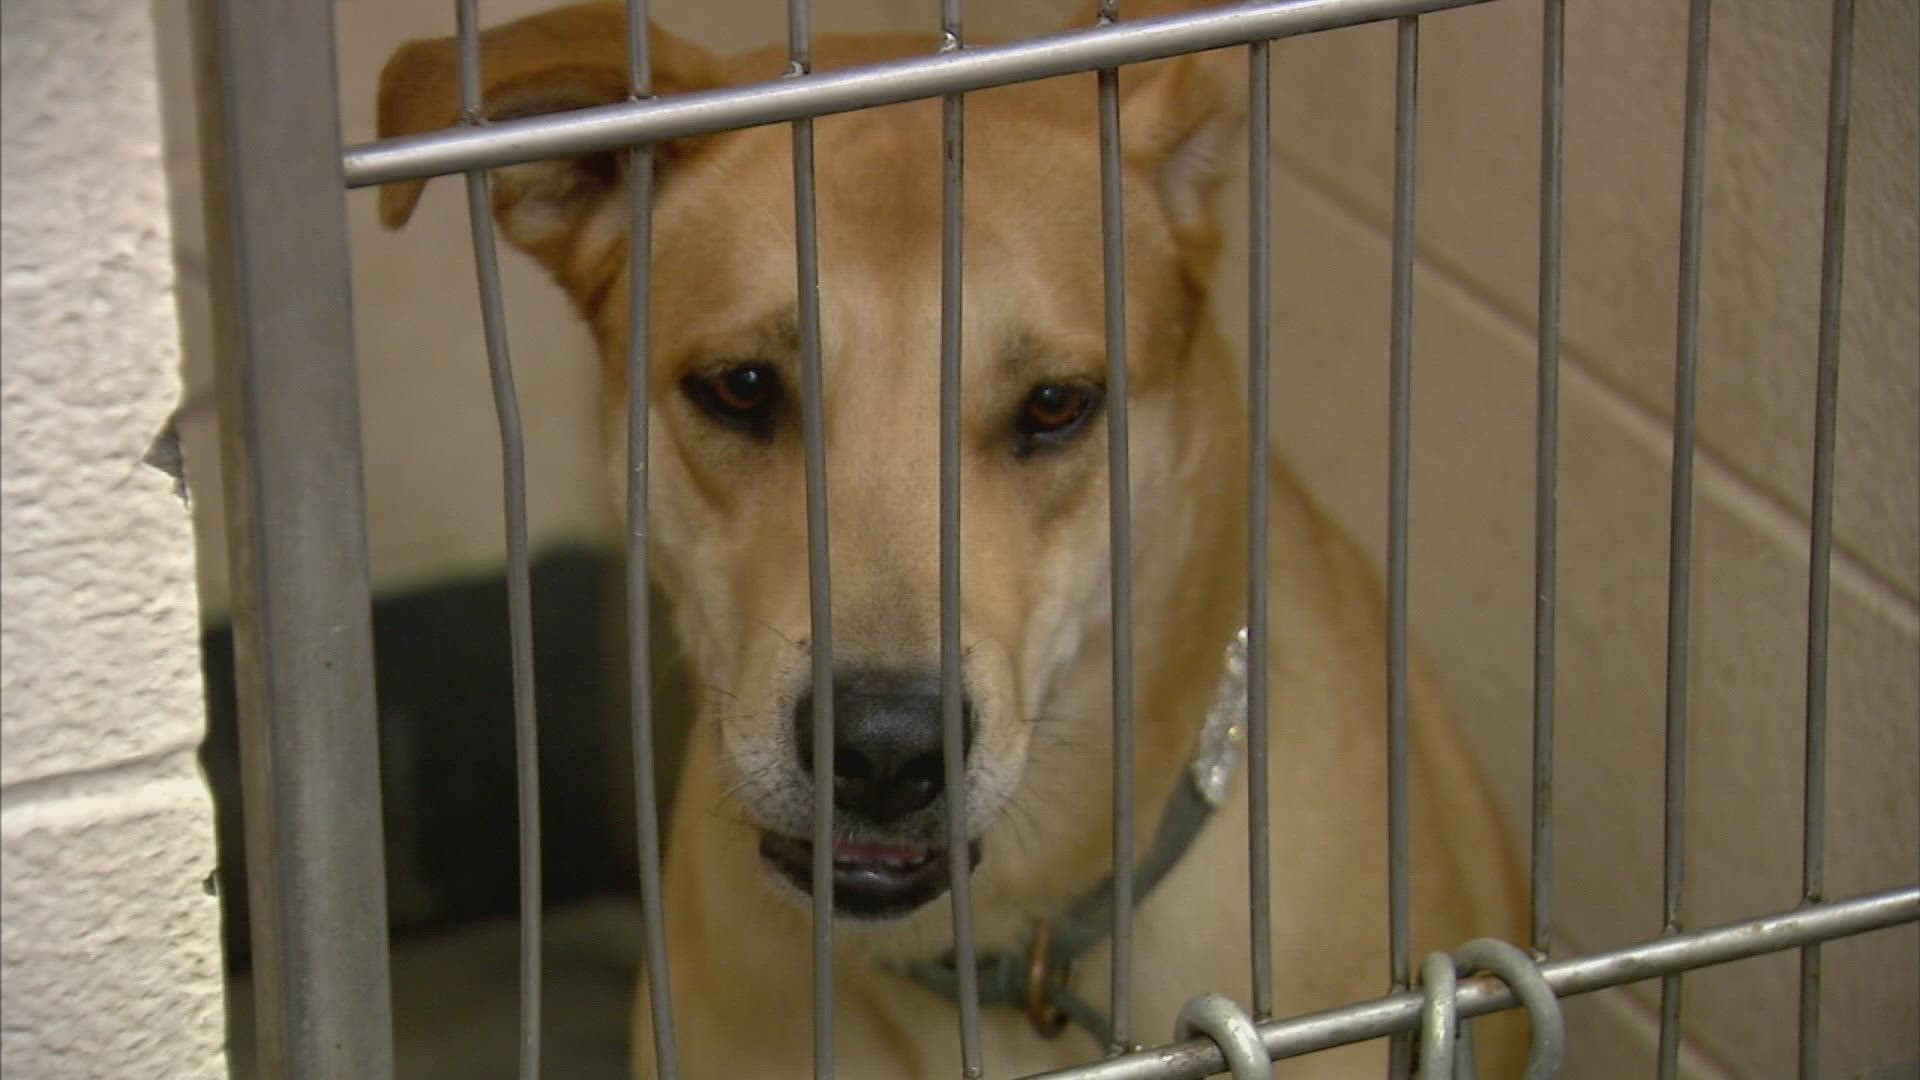 The shelter said they're at capacity and call their current situation "dire."